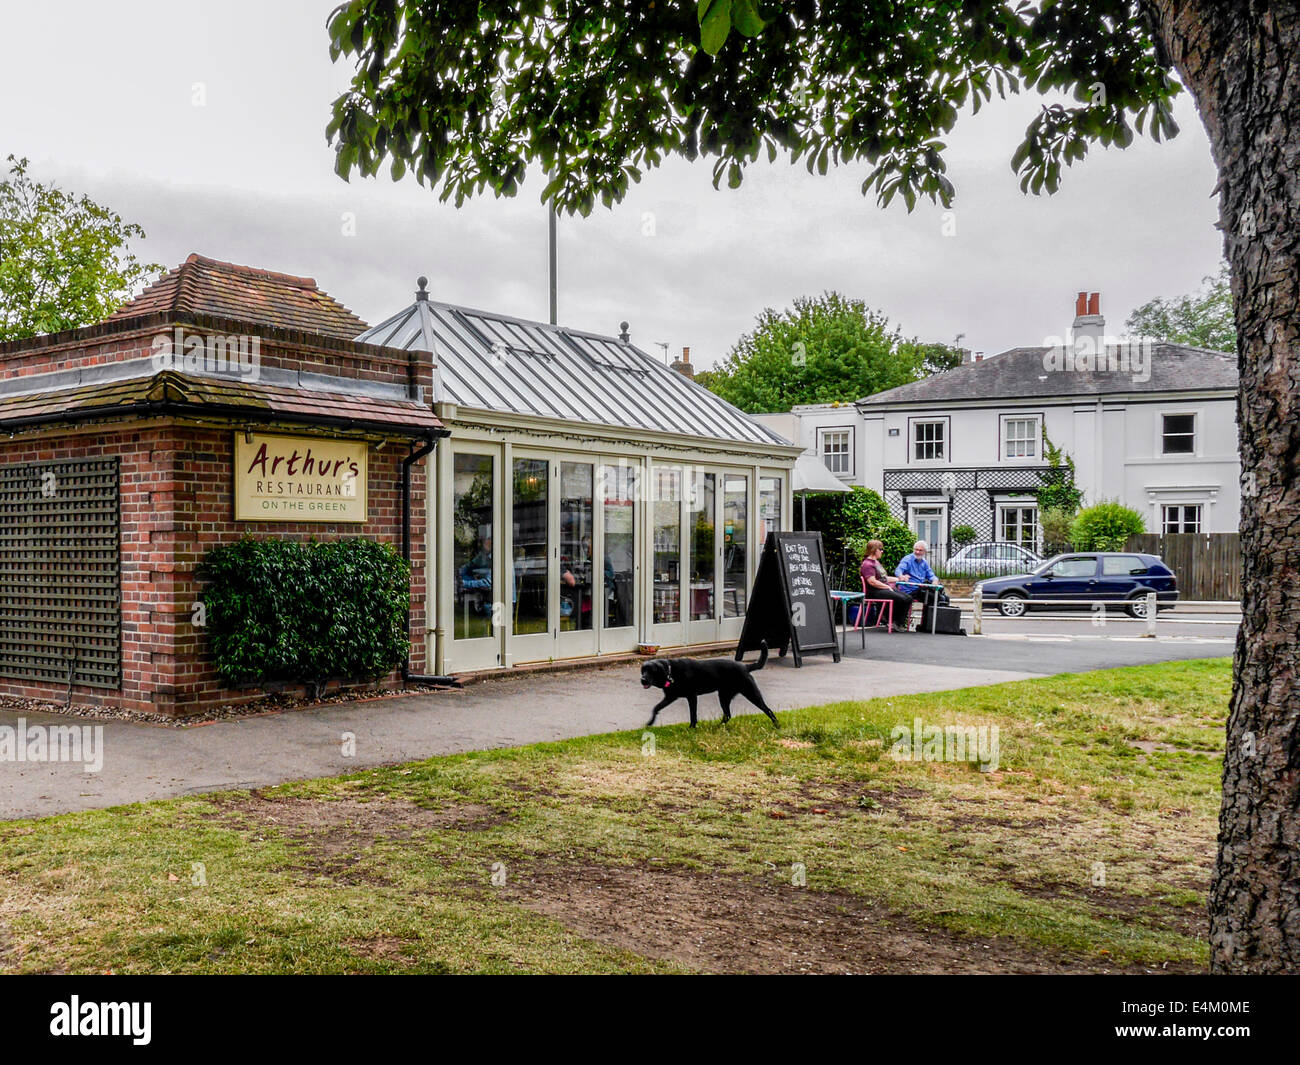 Aurthur's Restaurant on Twickenham Green. London, UK. The Diner is situated in a former public toilet building. Stock Photo